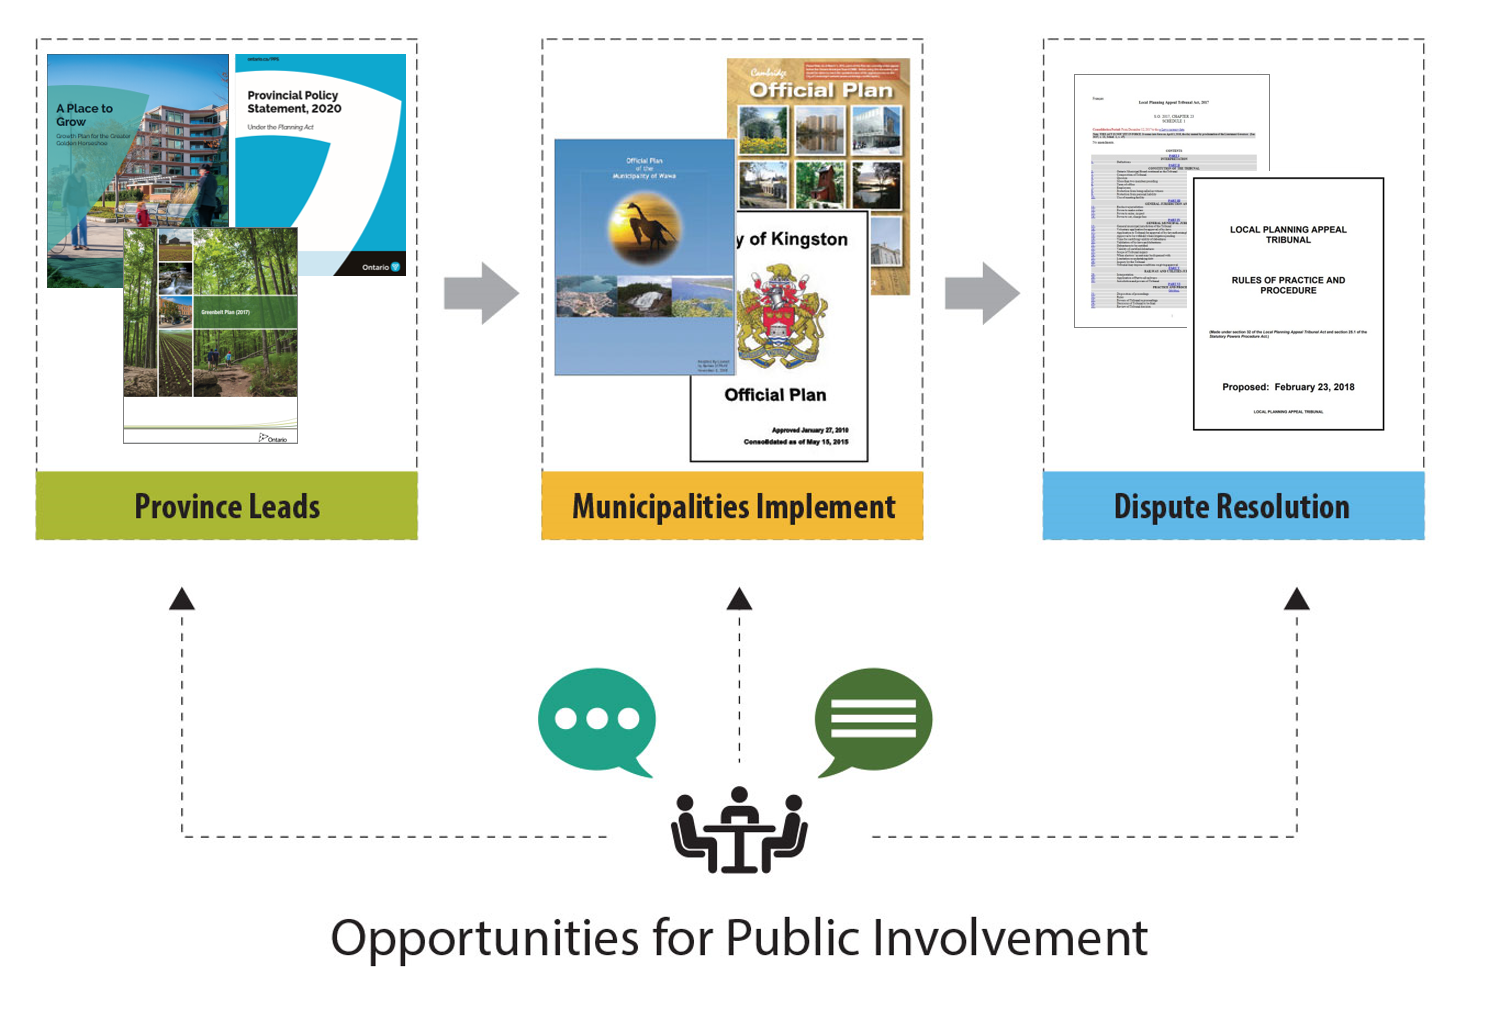 Overview of policy-led nature of the land use planning system and opportunities for public involvement. There are opportunities for the public to be involved in land use planning at different levels: provincial level (for example, when the province is reviewing their land use policies), local level (for example, when a municipality is amending their official plan), and through the dispute resolution process (for example, when an appeal is made to the Ontario Land Tribunal).